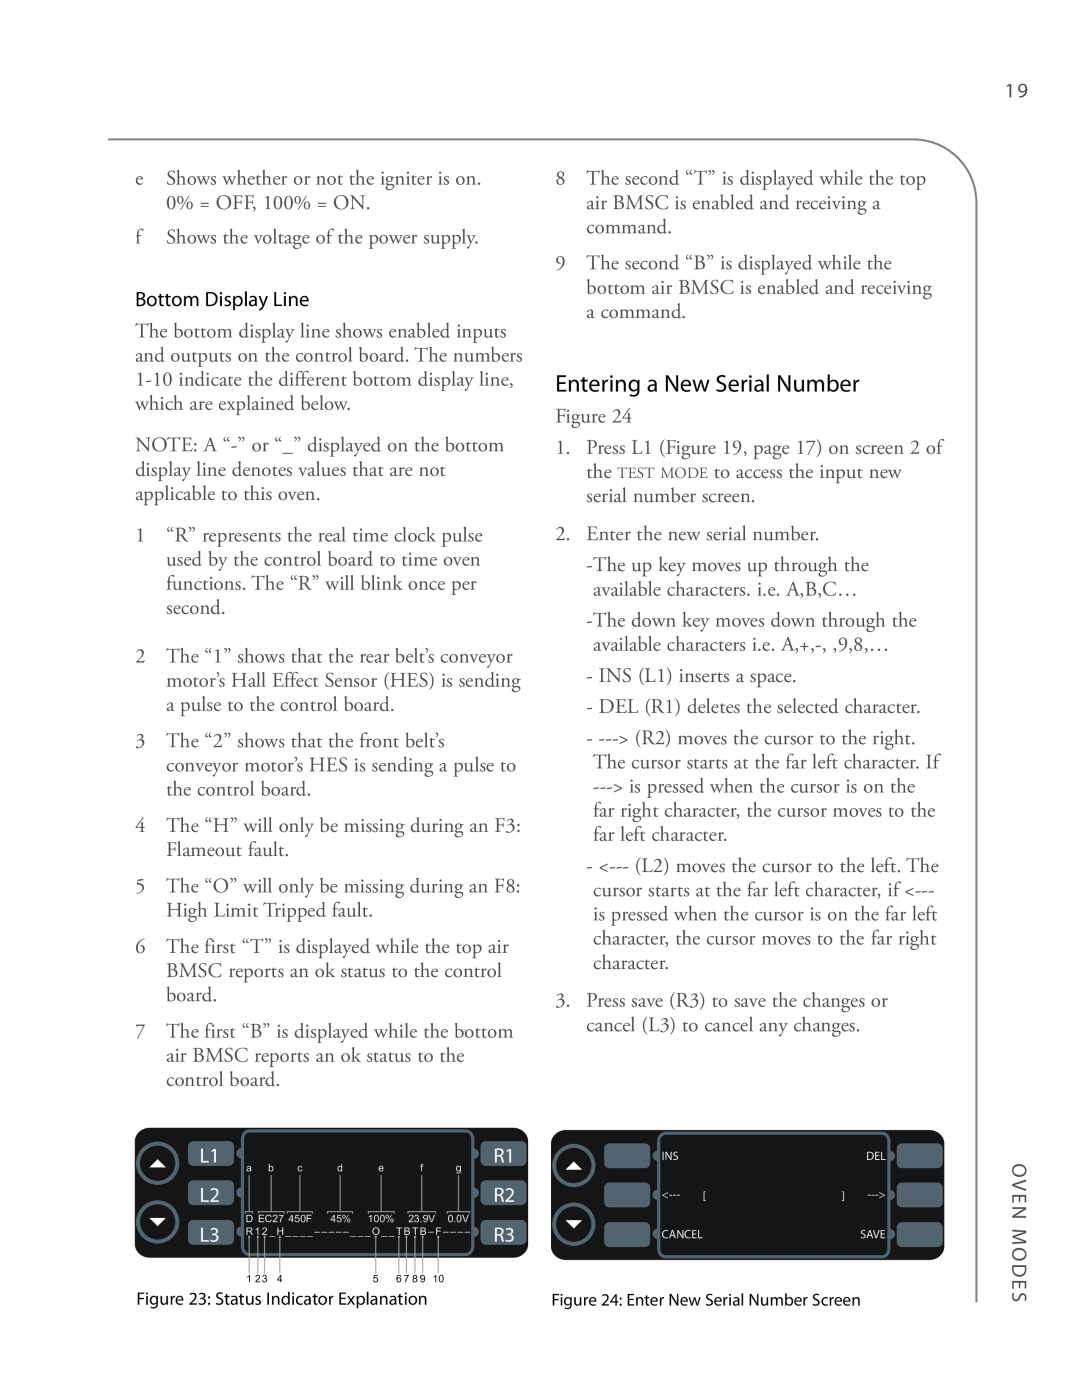 Turbo Chef Technologies 3240 manual Entering a New Serial Number 